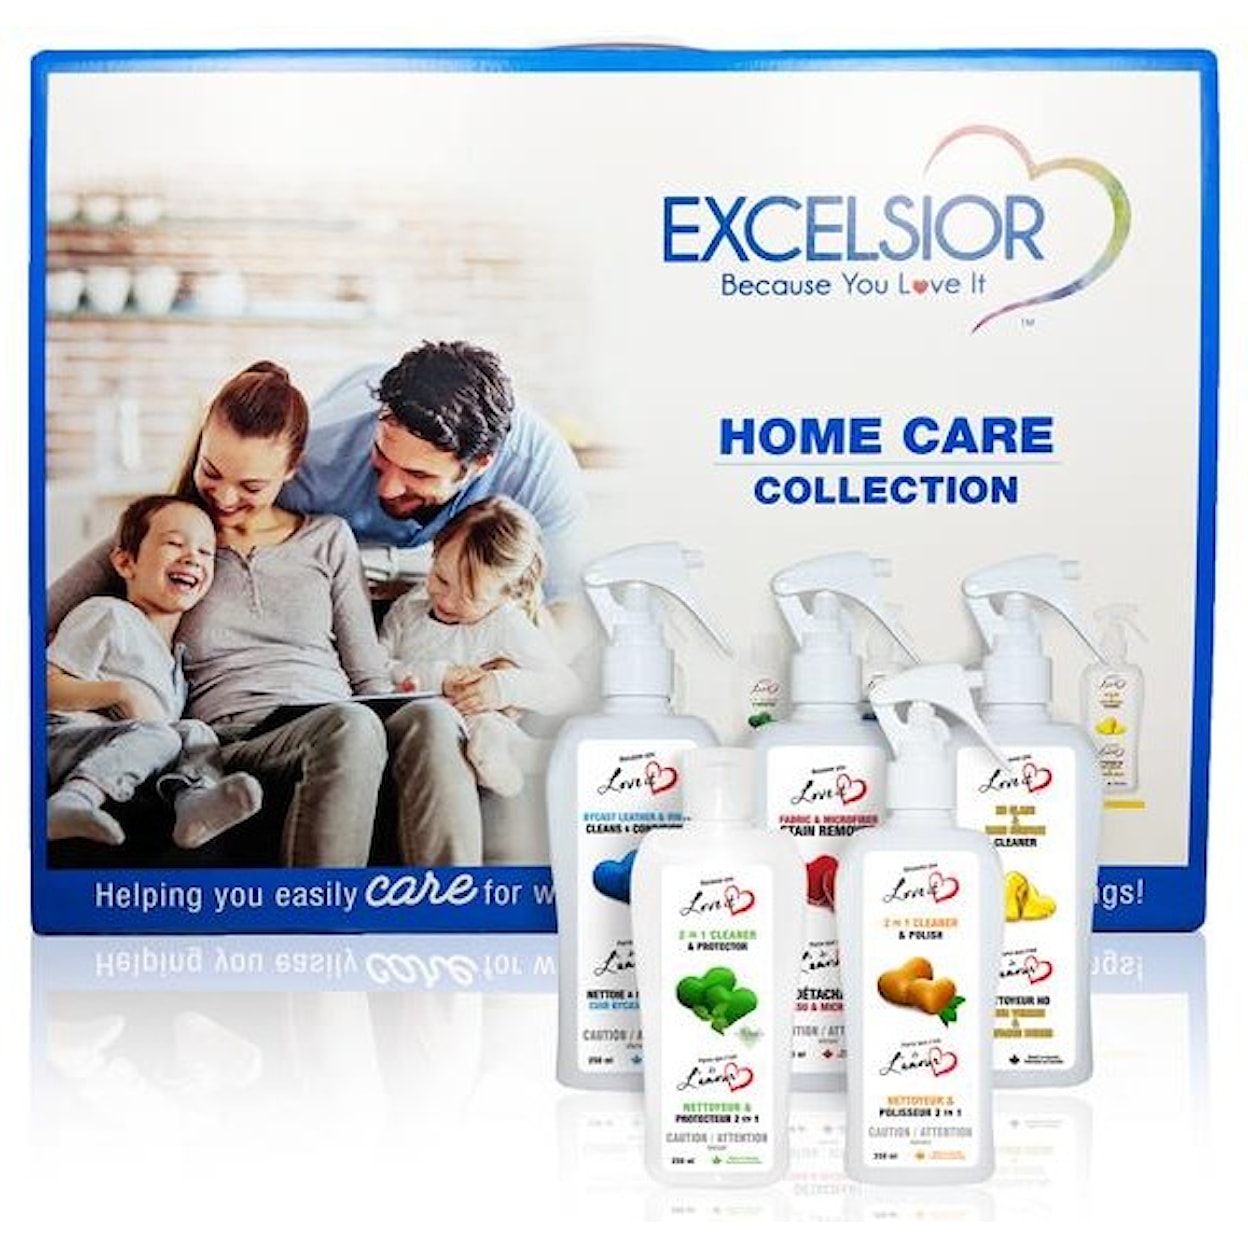 Excelsior Specialty Items & Care Kits Home Care Collection